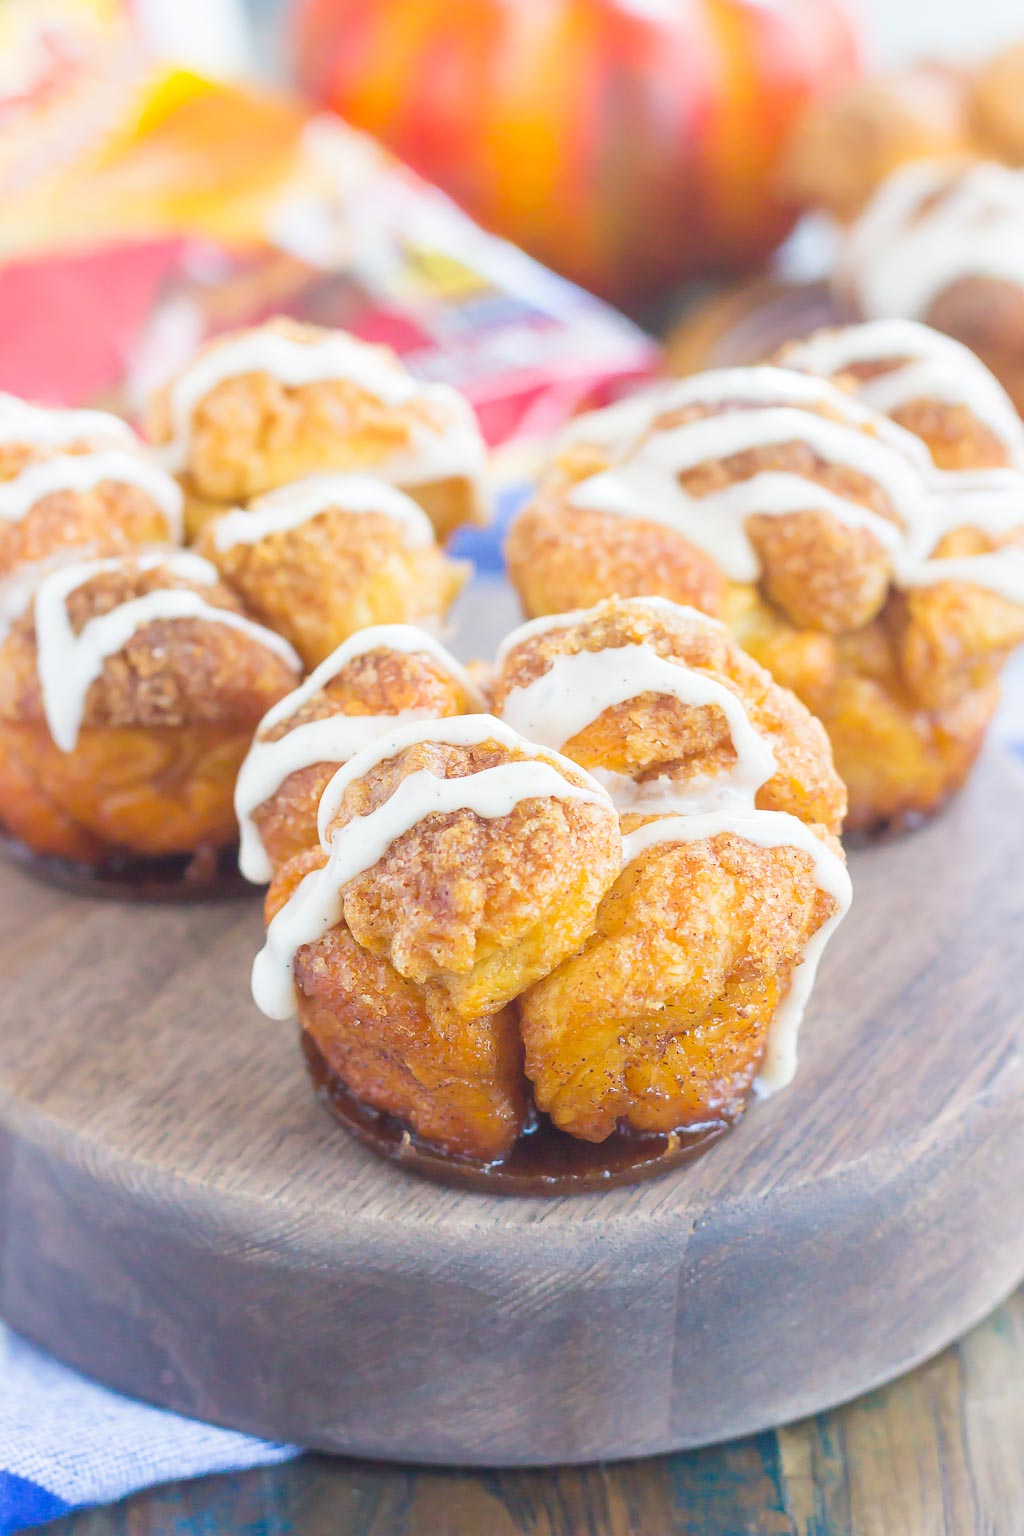 These Pumpkin Spice Monkey Bread Muffins are a simple treat that's perfect for breakfast or dessert. Pre-made dough is rolled in a cozy pumpkin spice blend and then baked in muffin cups. Topped with a sweet pumpkin glaze and great for the holidays, this gooey muffin is sure to impress everyone! #monkeybread #monkeybreadrecipe #pumpkinmonkeybread #pumpkindessert #dessert #falldessert #pumpkinrecipe